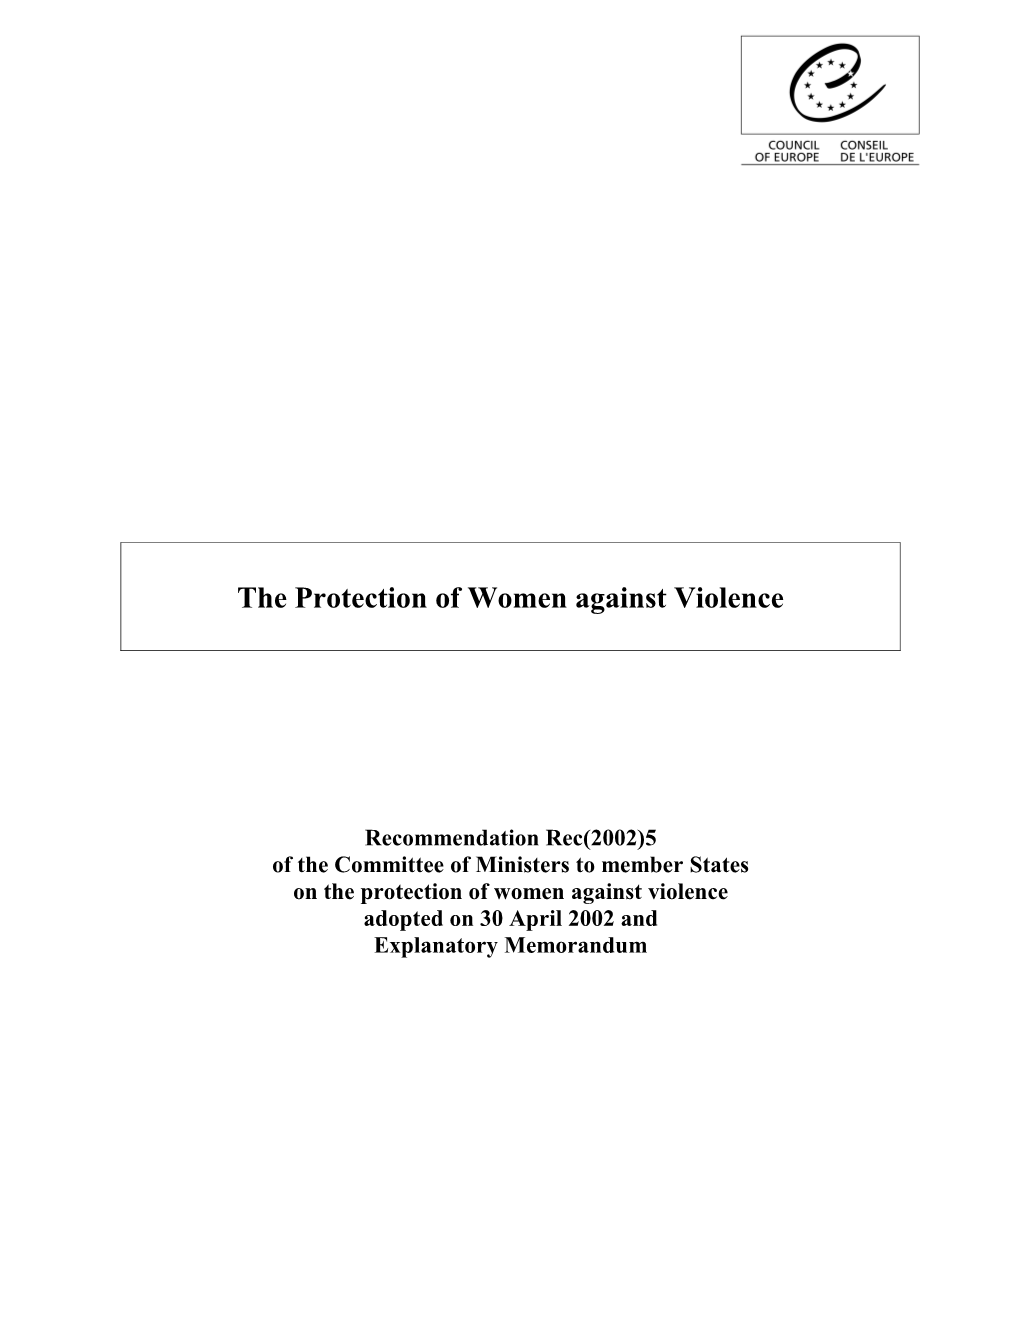 Recommendation on the Protection of Women Against Violence